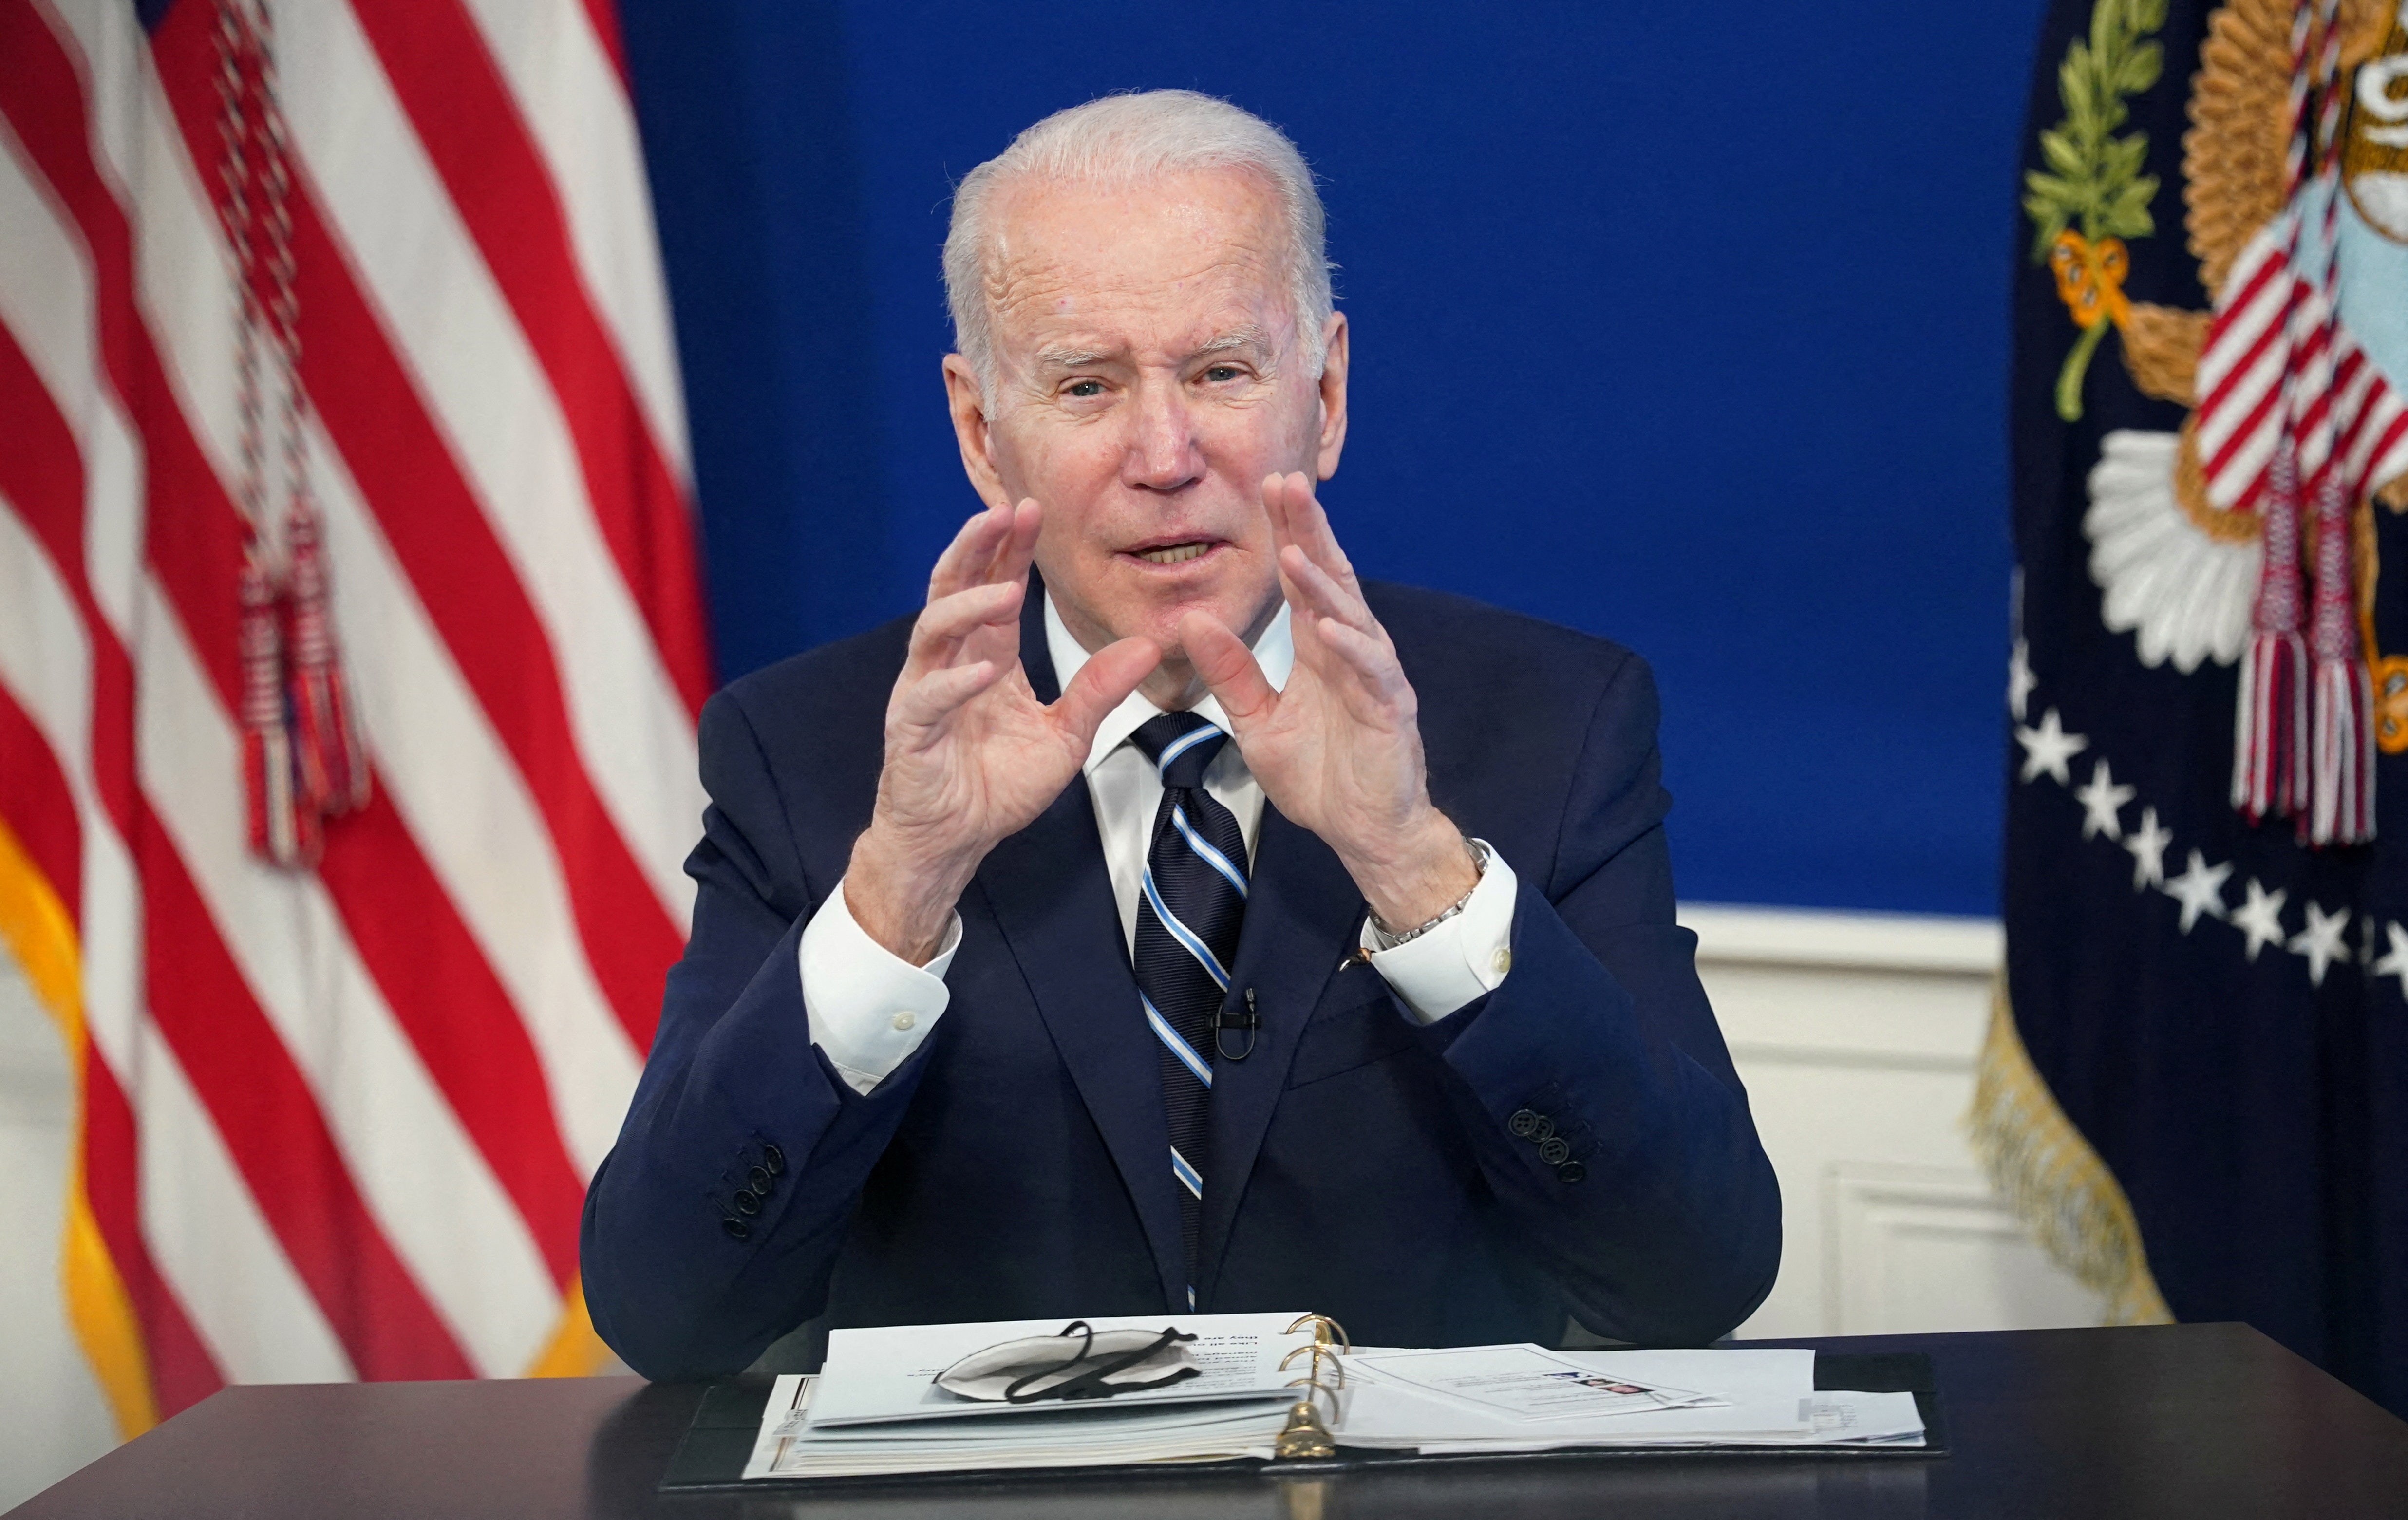 Biden White House pummeled for rollout of COVID tests expected to ship ‘within 7-12 days of ordering’